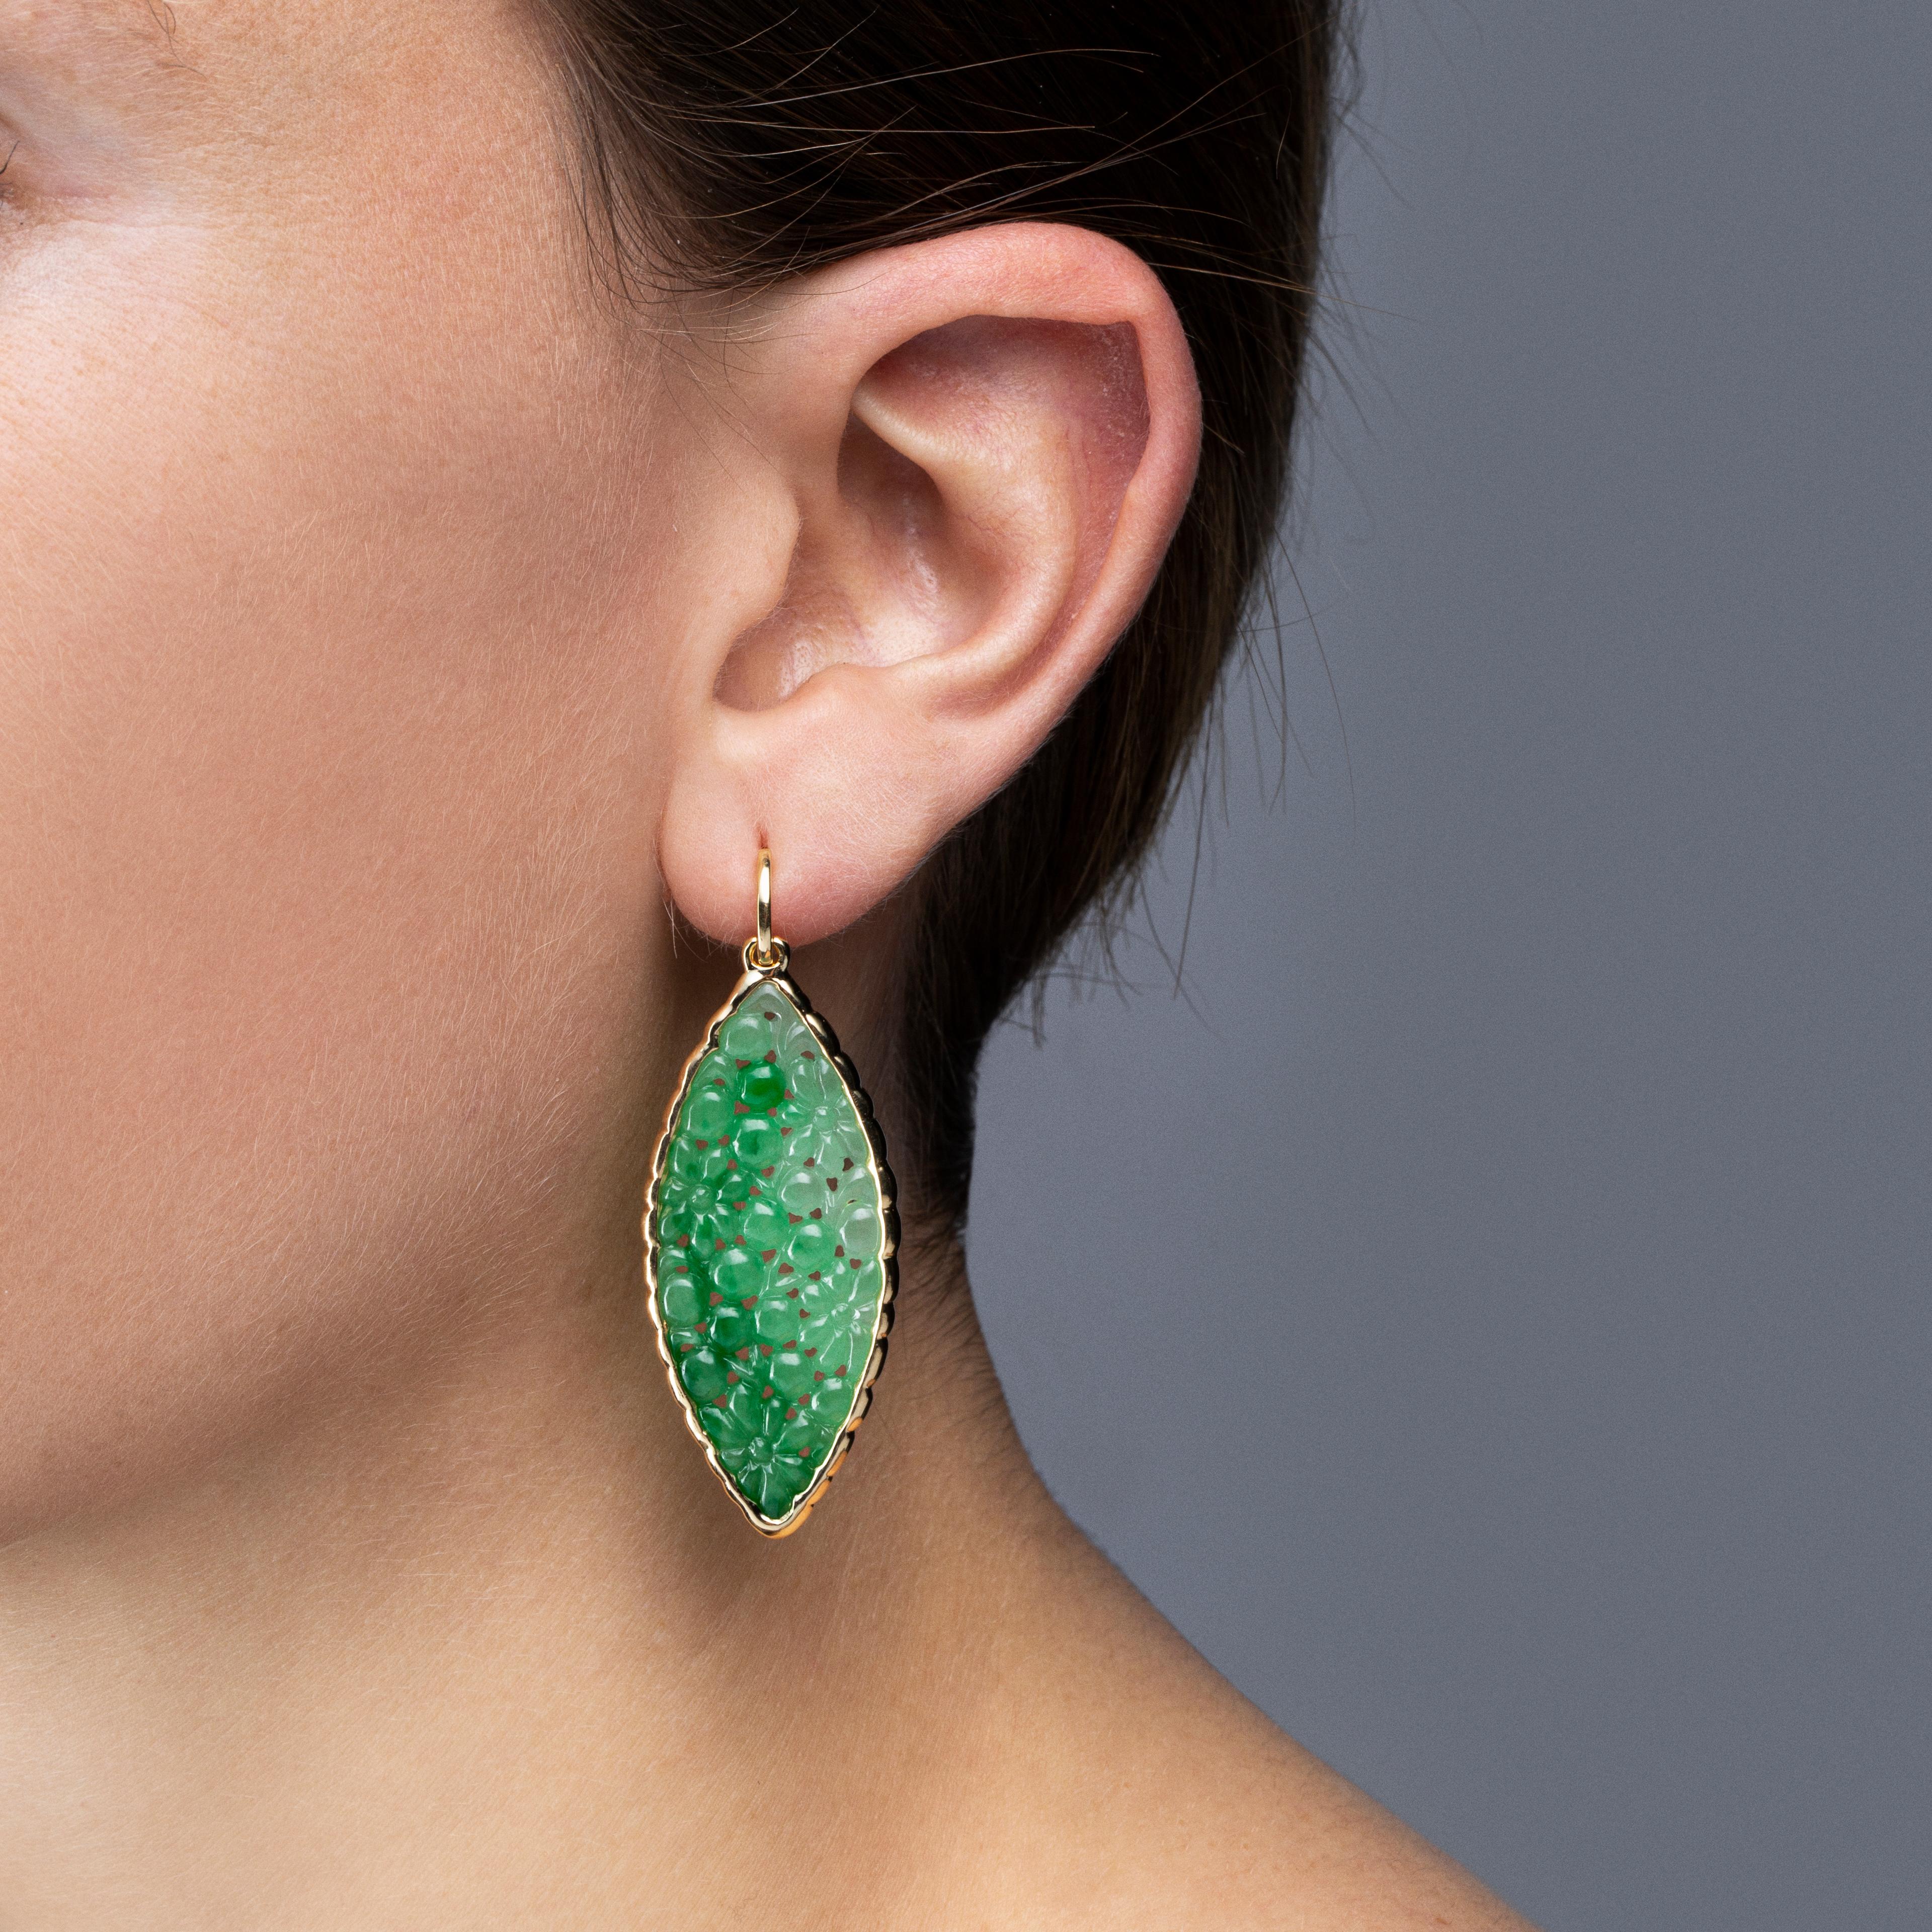 Alex Jona design collection, hand crafted in Italy, 18 karat yellow gold carved Burmese Jade one-ok-a-kind pendant earrings.
Dimensions : H 2.18in/55.5mm,W 0.78in/20mm, D 0.13in/3.5mm.

Alex Jona jewels stand out, not only for their special design